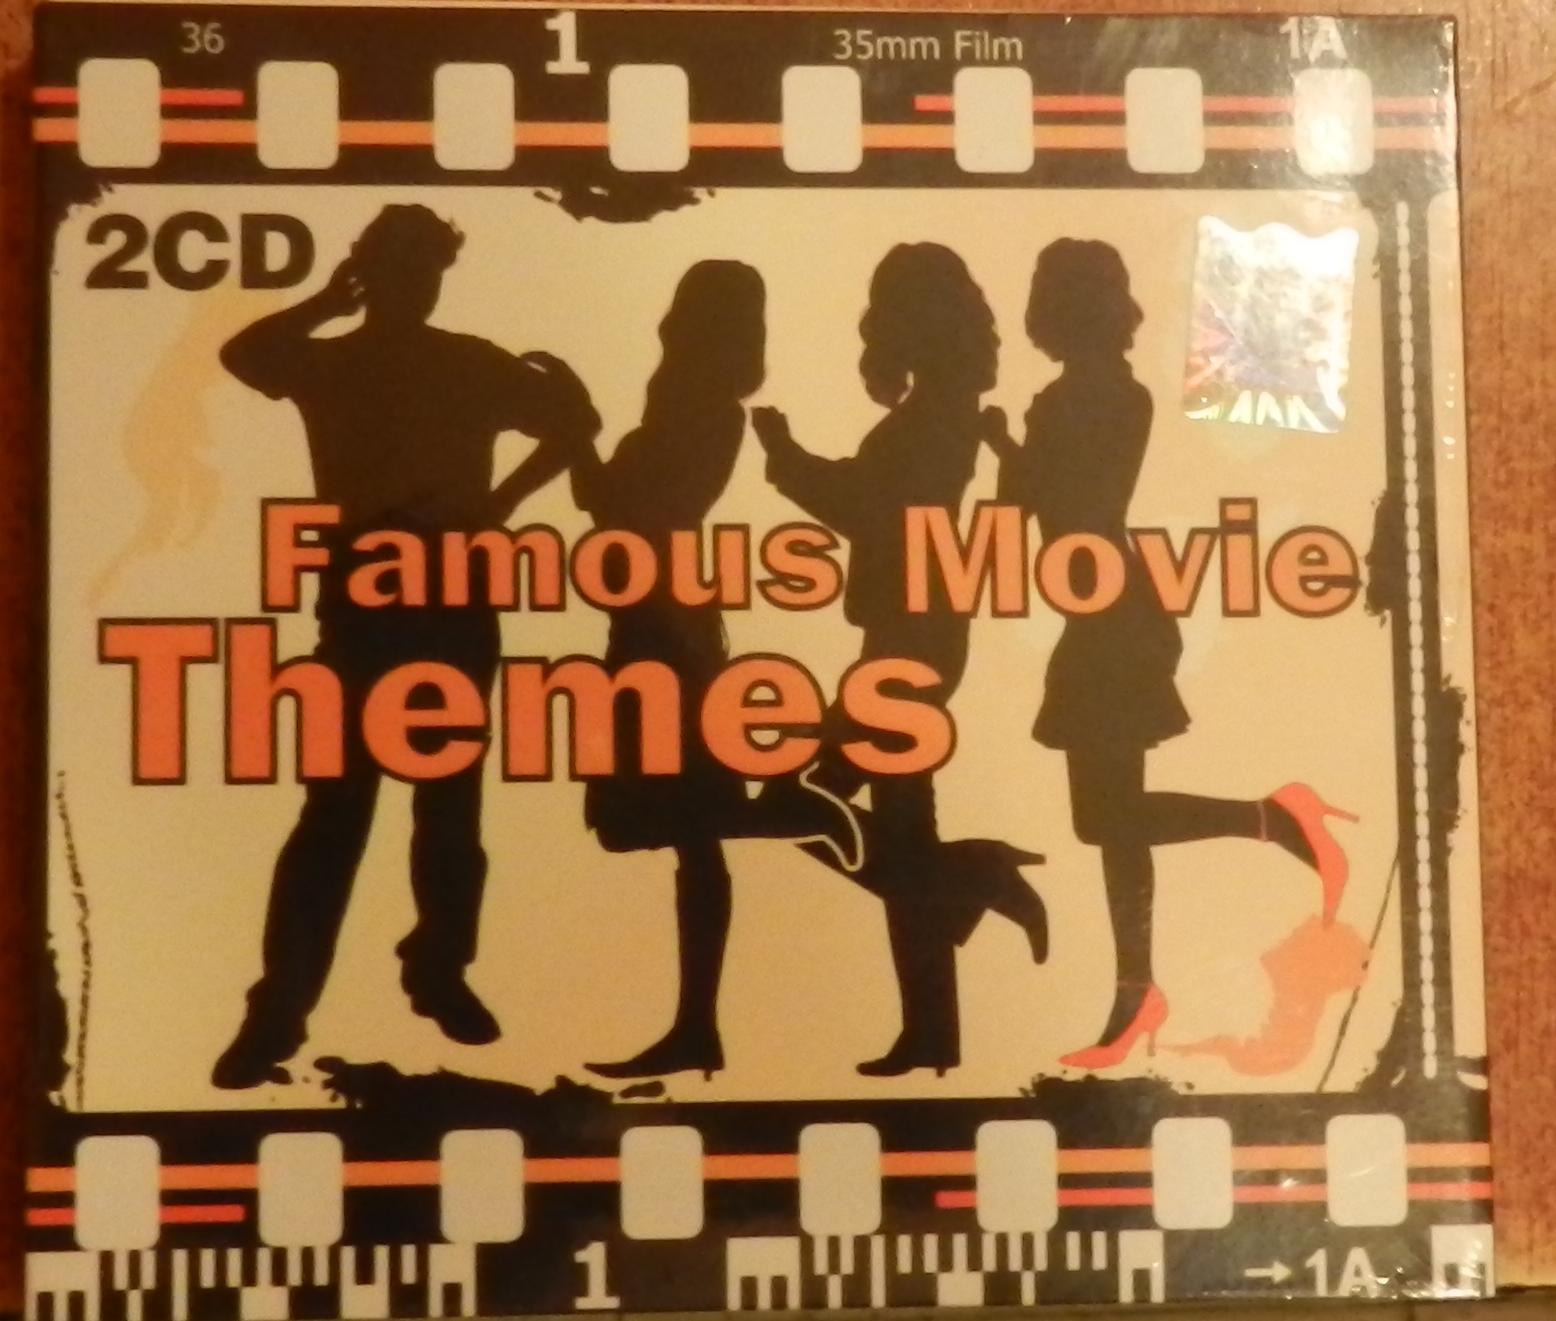 2CD Famous Movie Themes